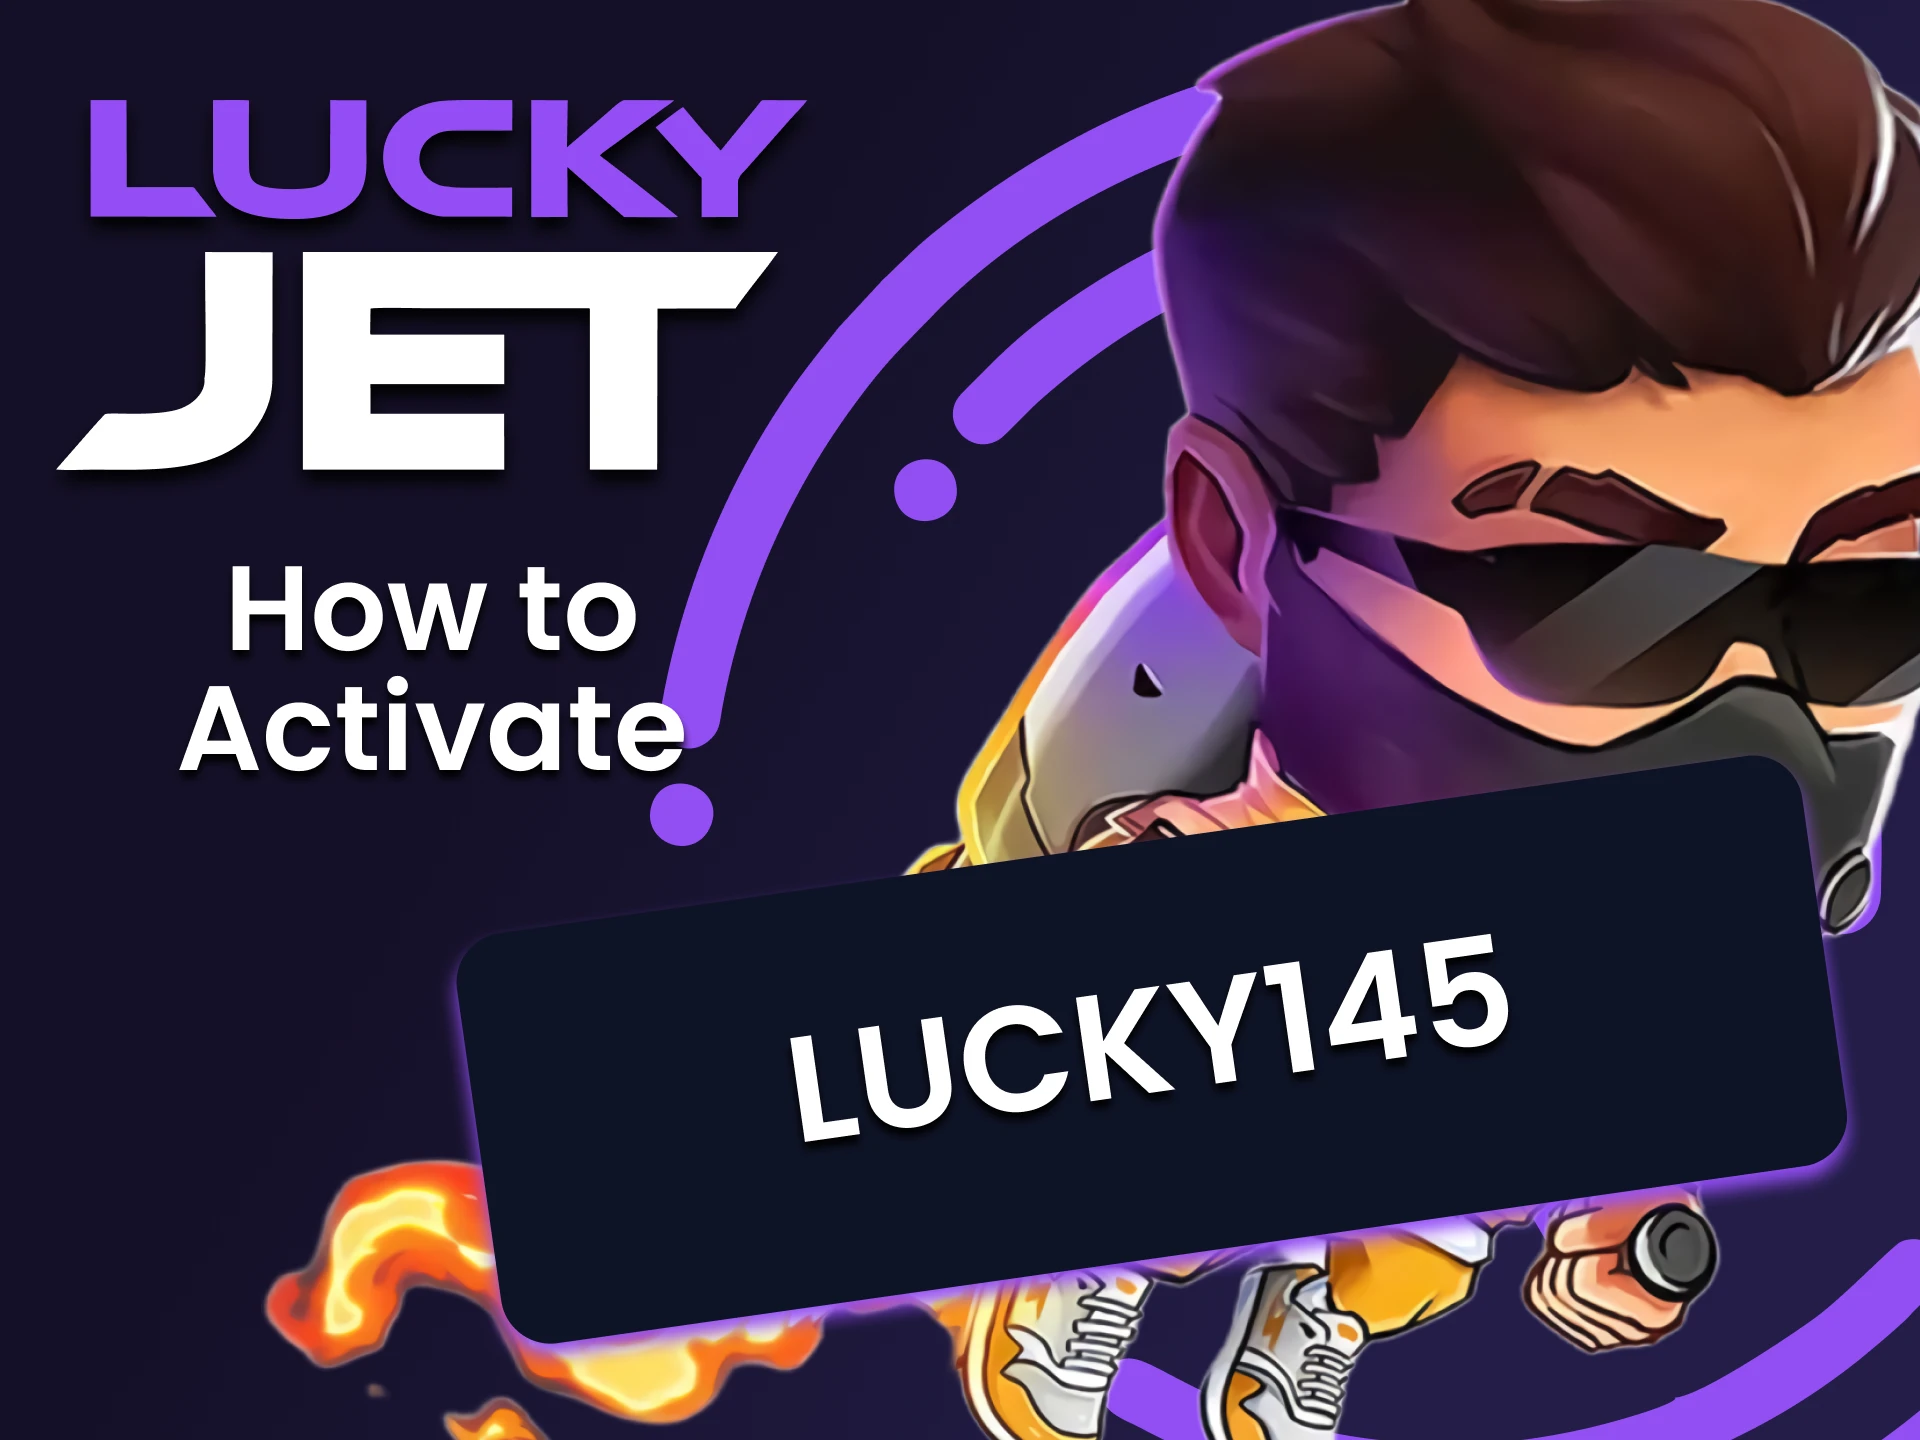 Find out the promotional code to receive a bonus in the Lucky Jet game.